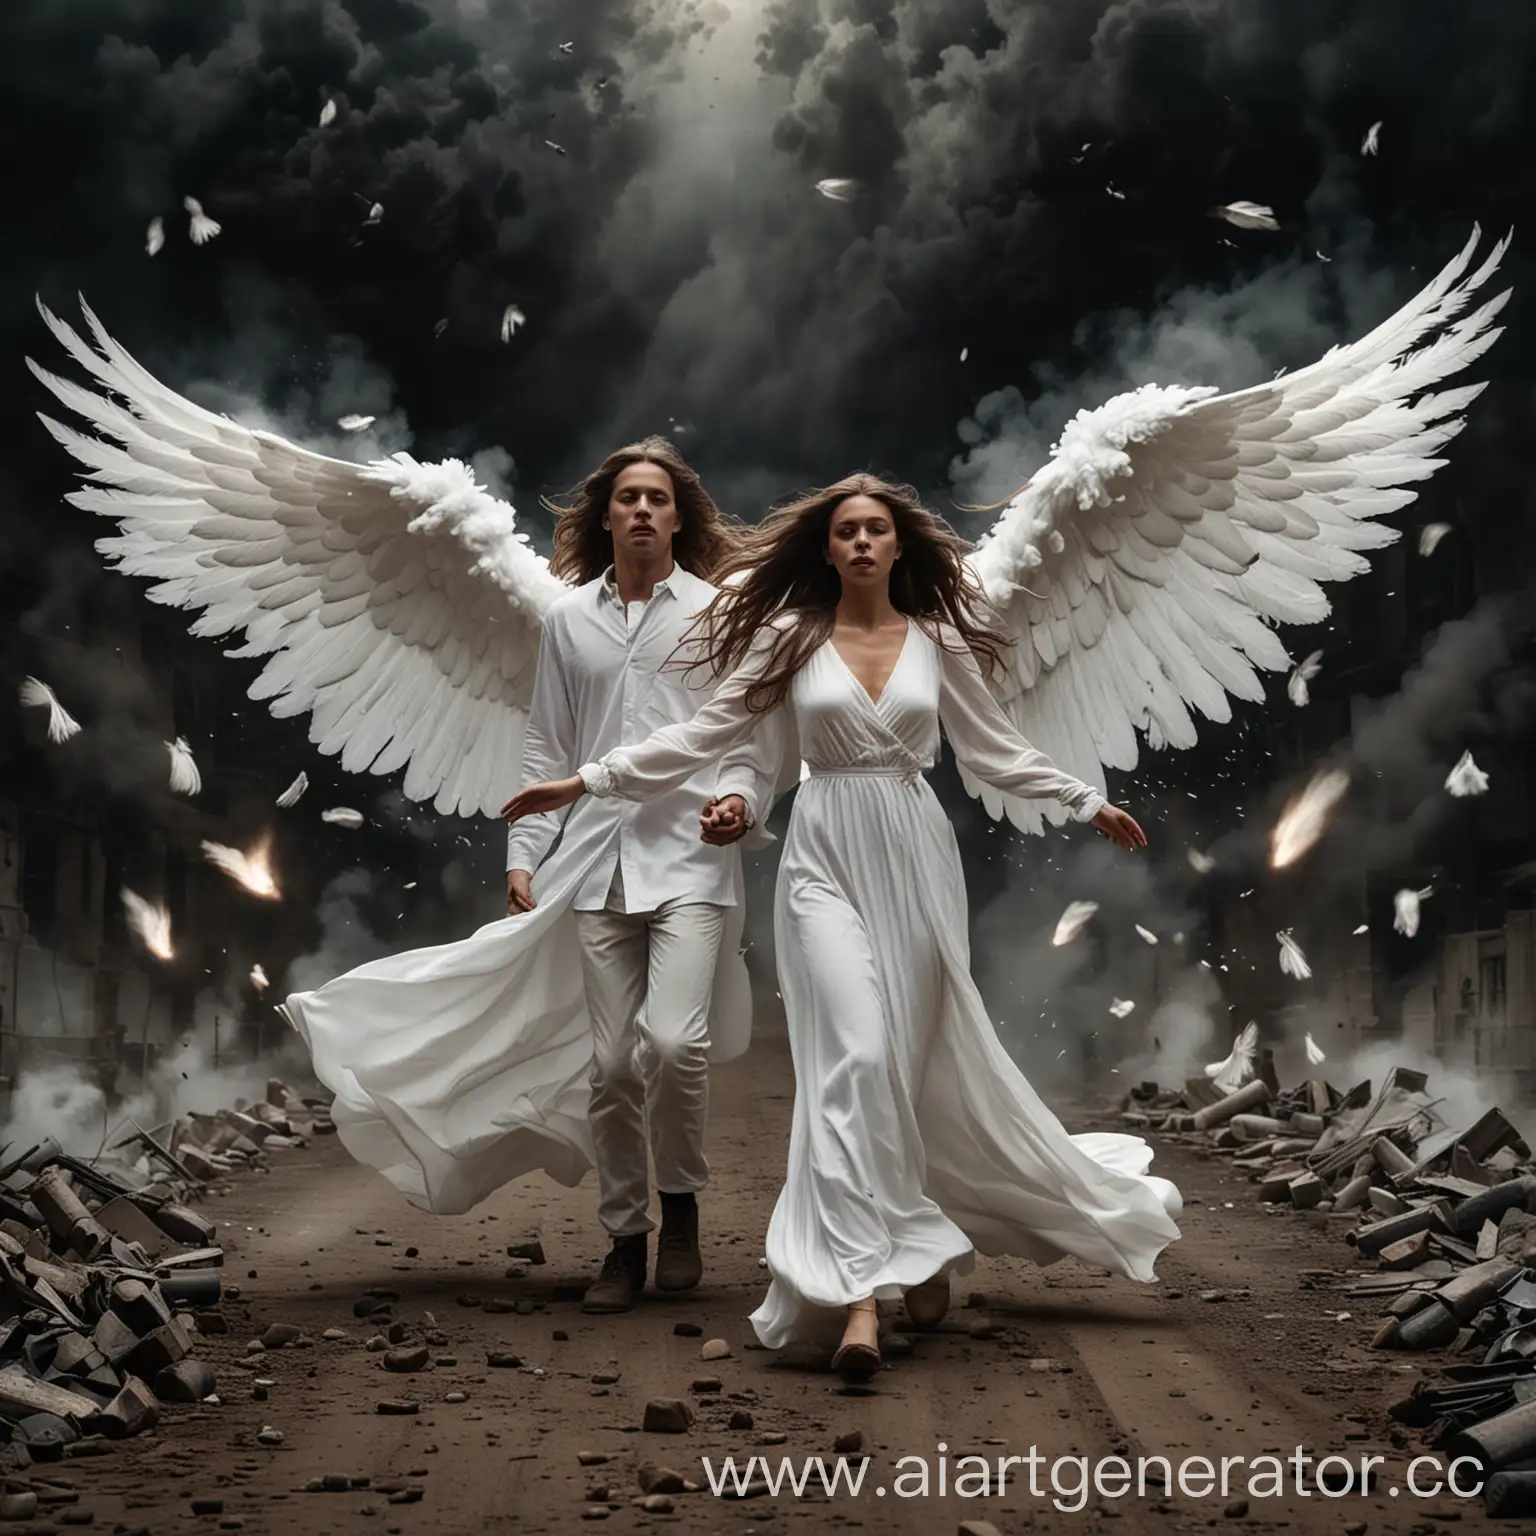 dark atmosphere couple portrait of A woman and man, she is in a White flowing dress with long hair looks straight and, running among the bombs , to a man in white clothes with wings, he spread his arms and wings like an angel to cover her